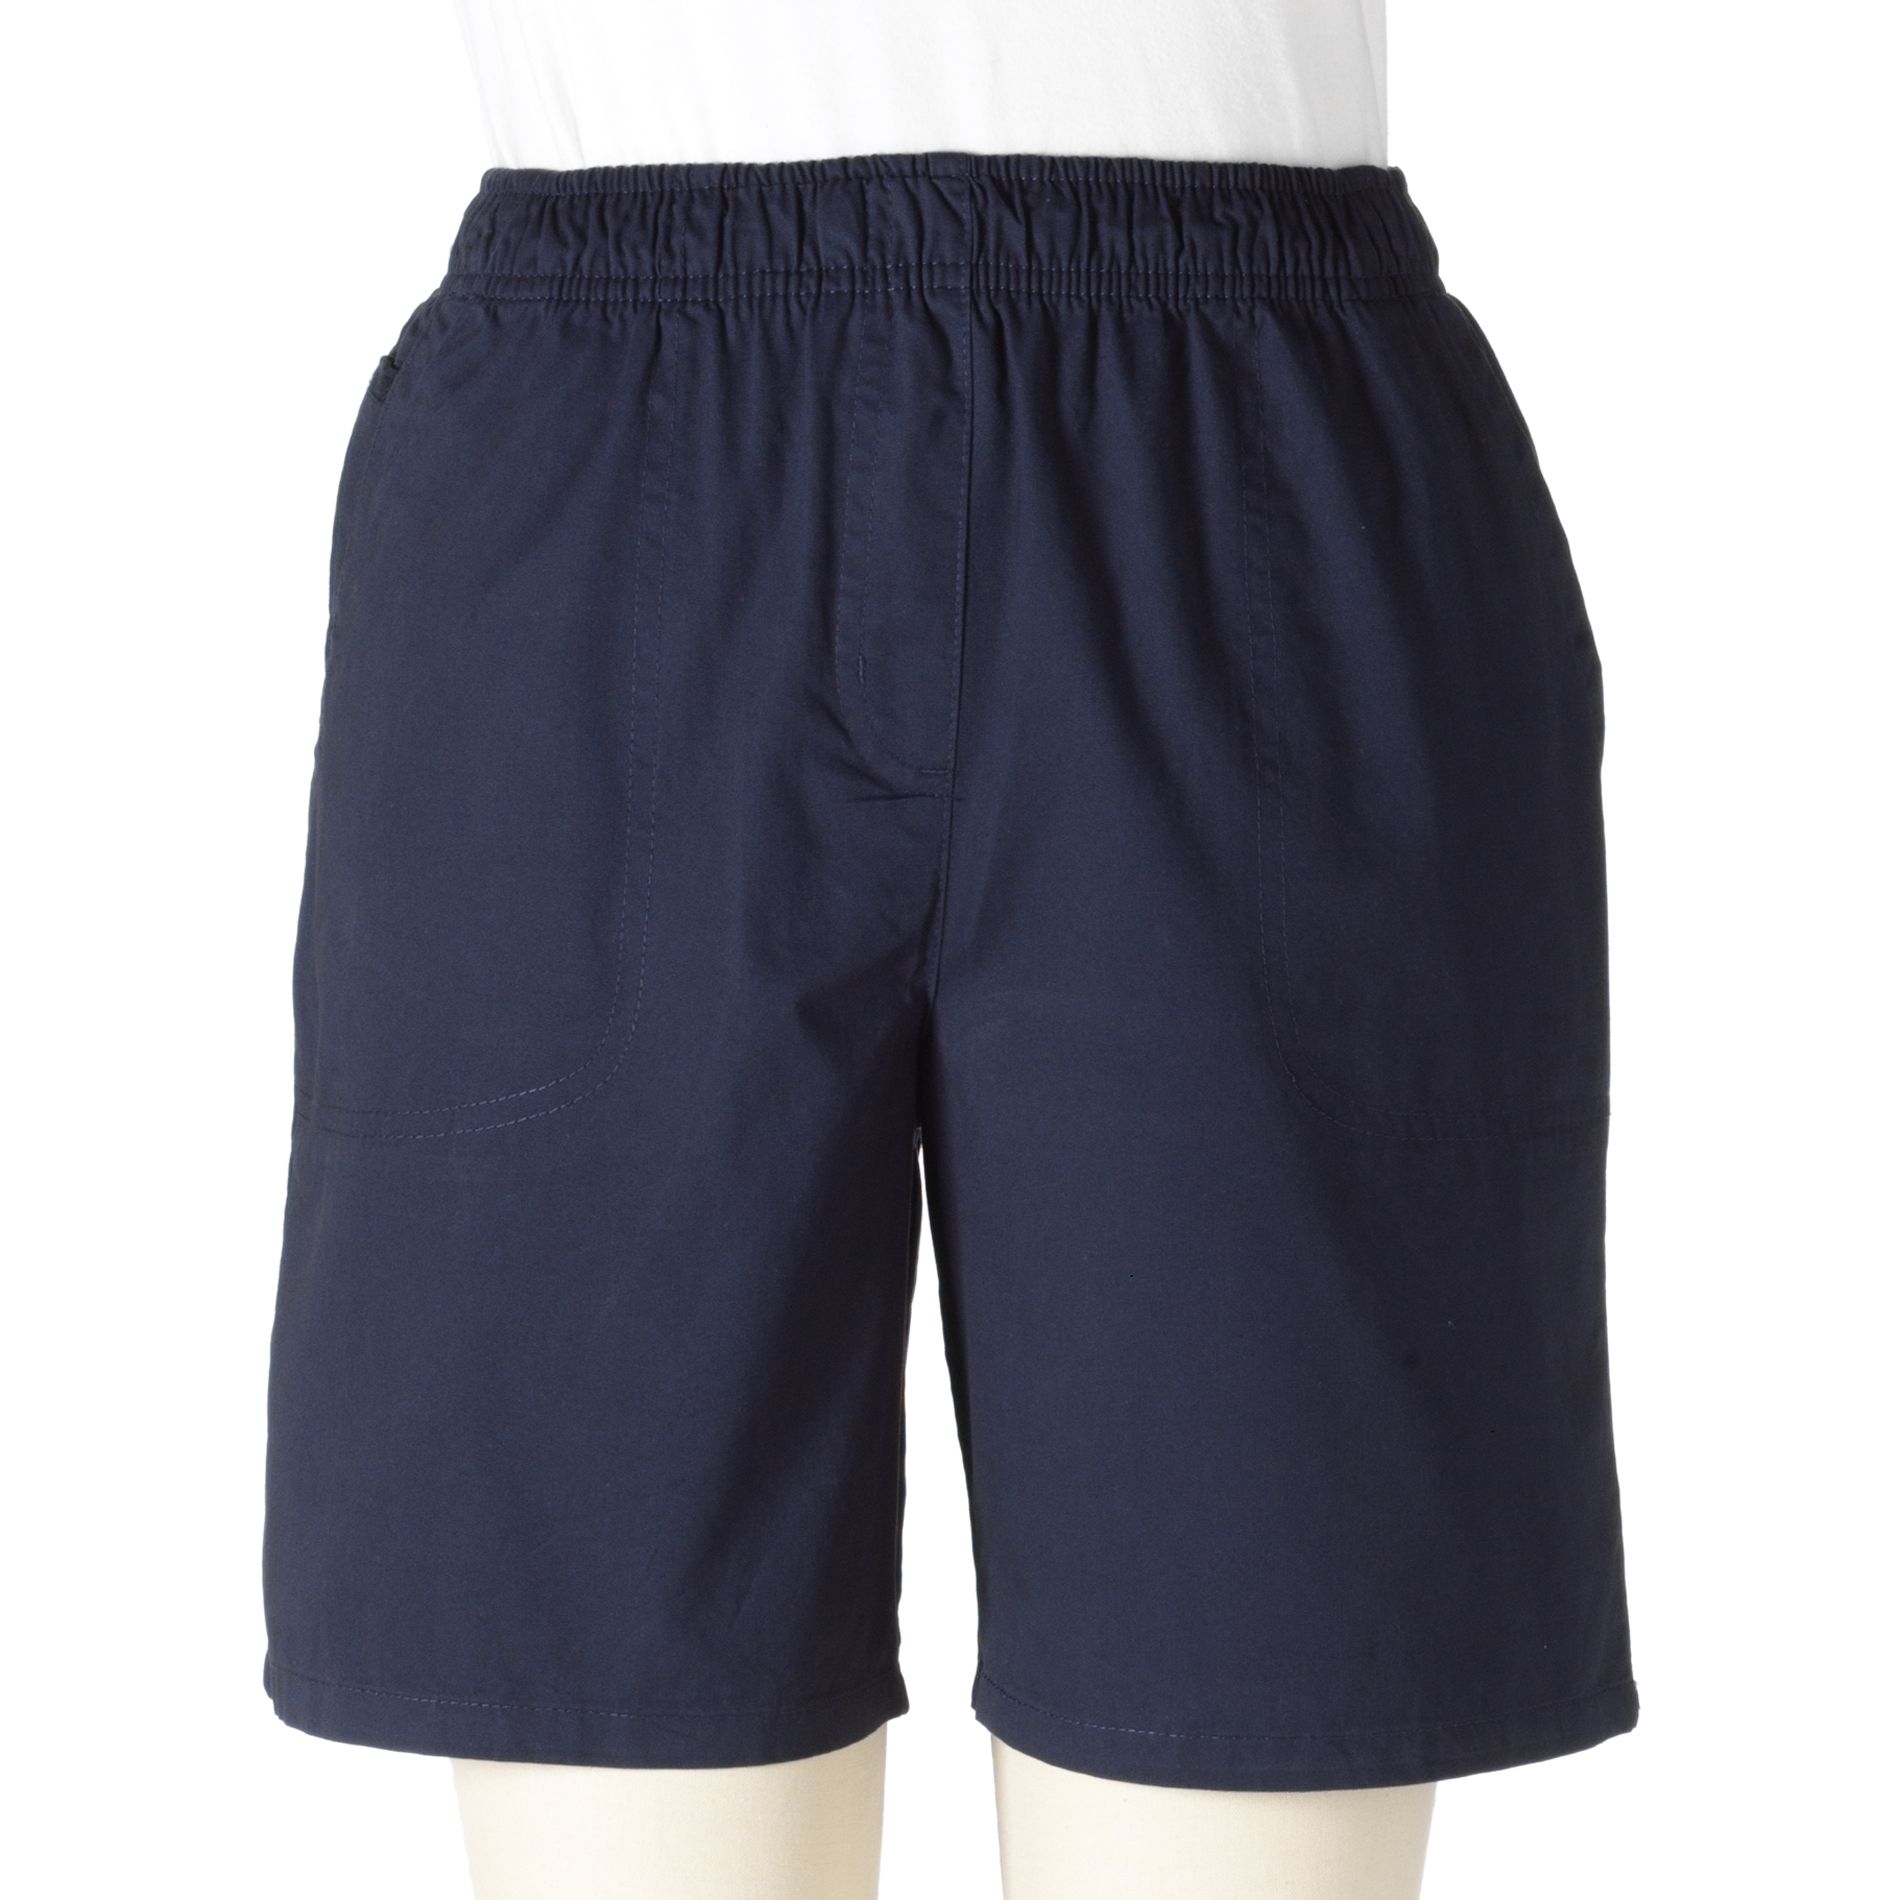 Classic Elements Pull On Twill Short